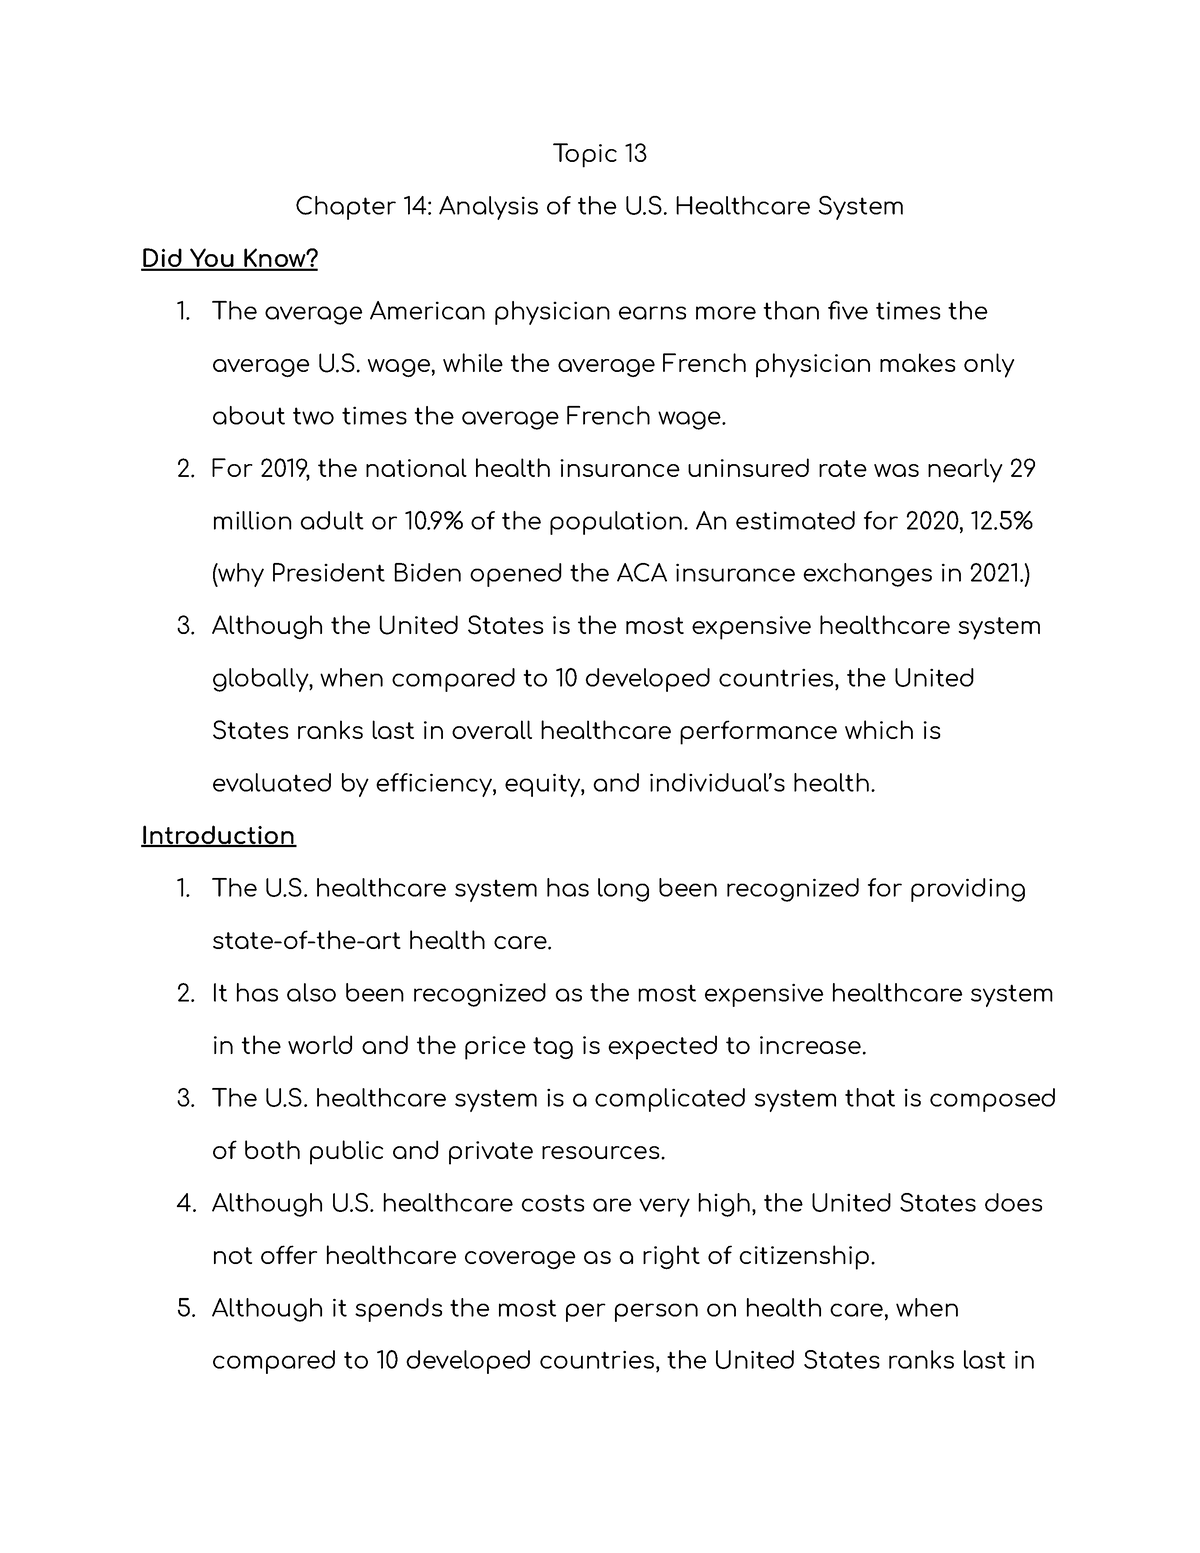 research paper on us healthcare system